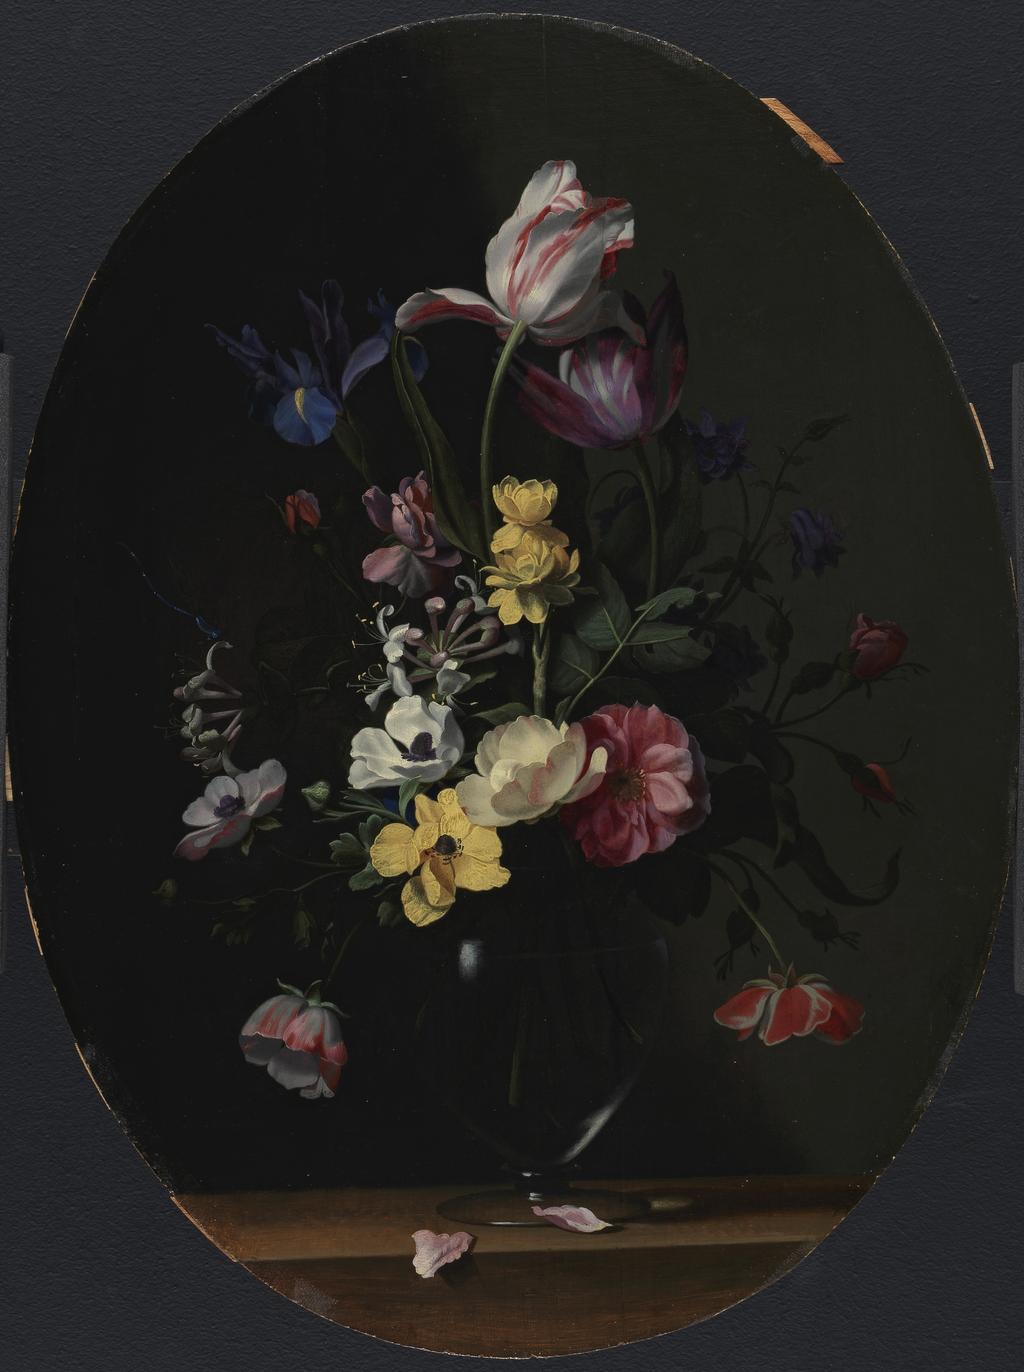 An image of A vase of flowers. Picart, Jean Michel (Flemish, c.1600-1682). Oil on panel, height 50.1 cm, width 38.05 cm. 17th century. Pendant to PD.36-1975.